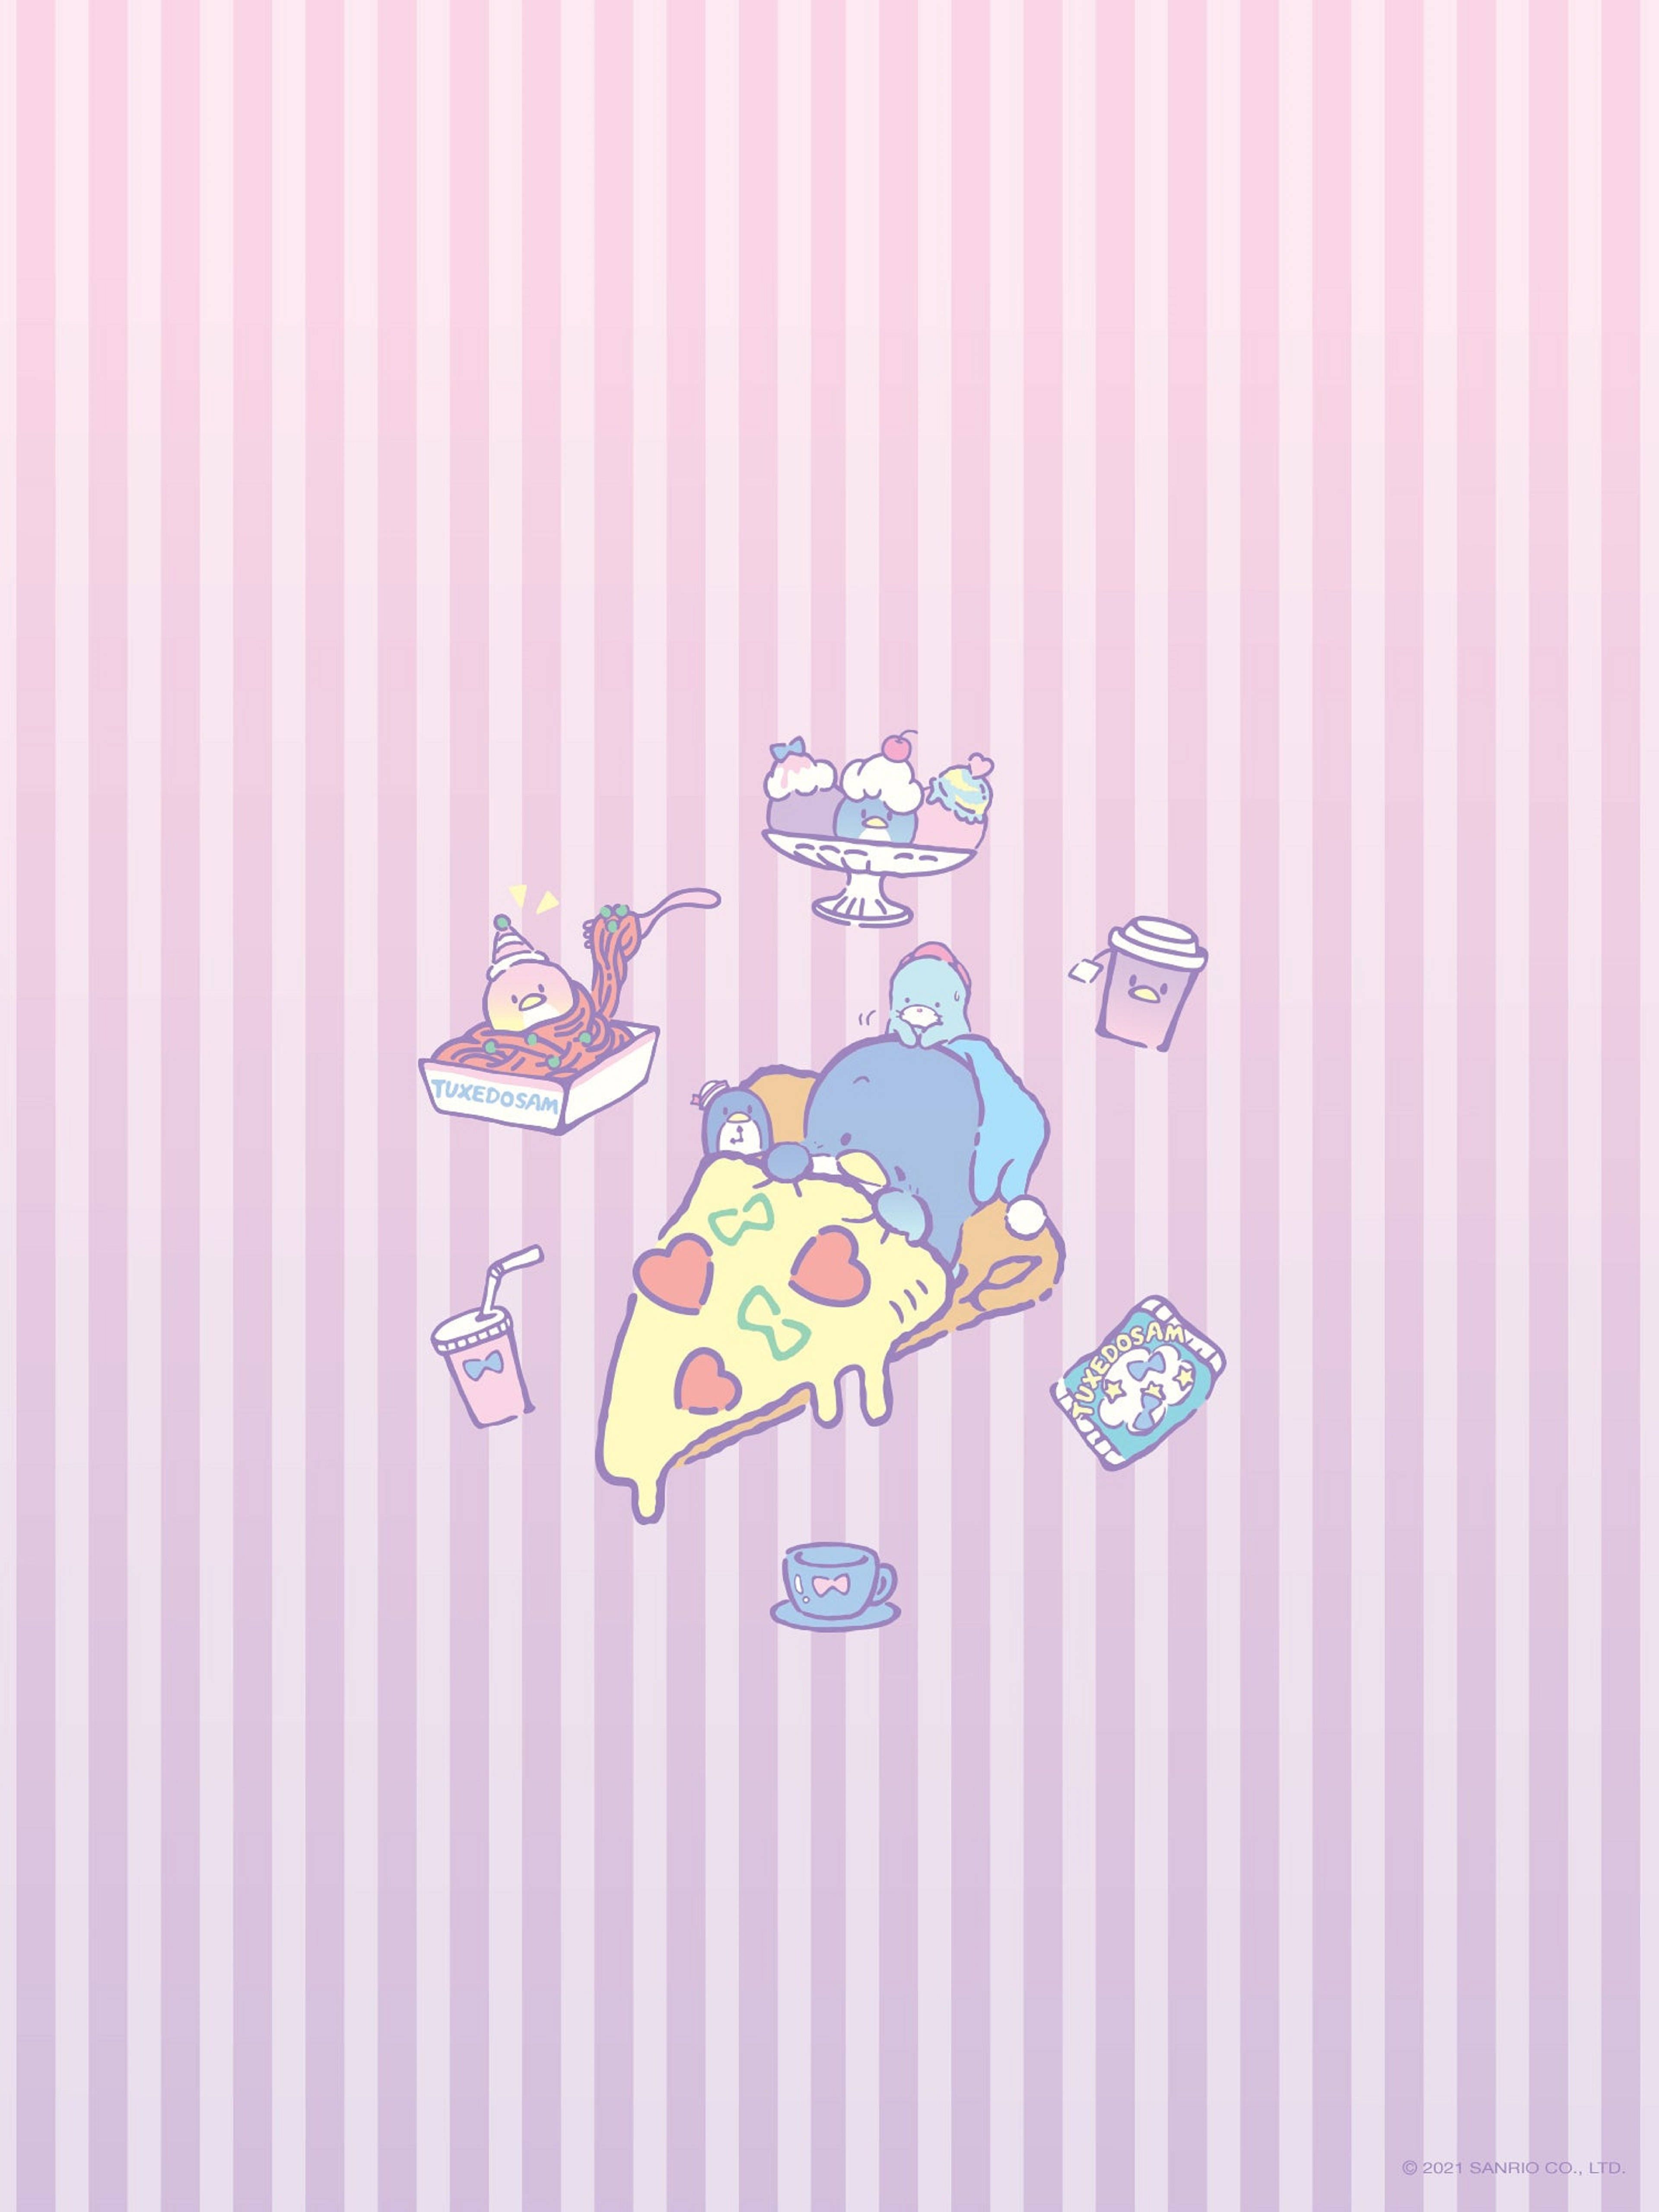 A pink and blue striped wallpaper with food on it - Pizza